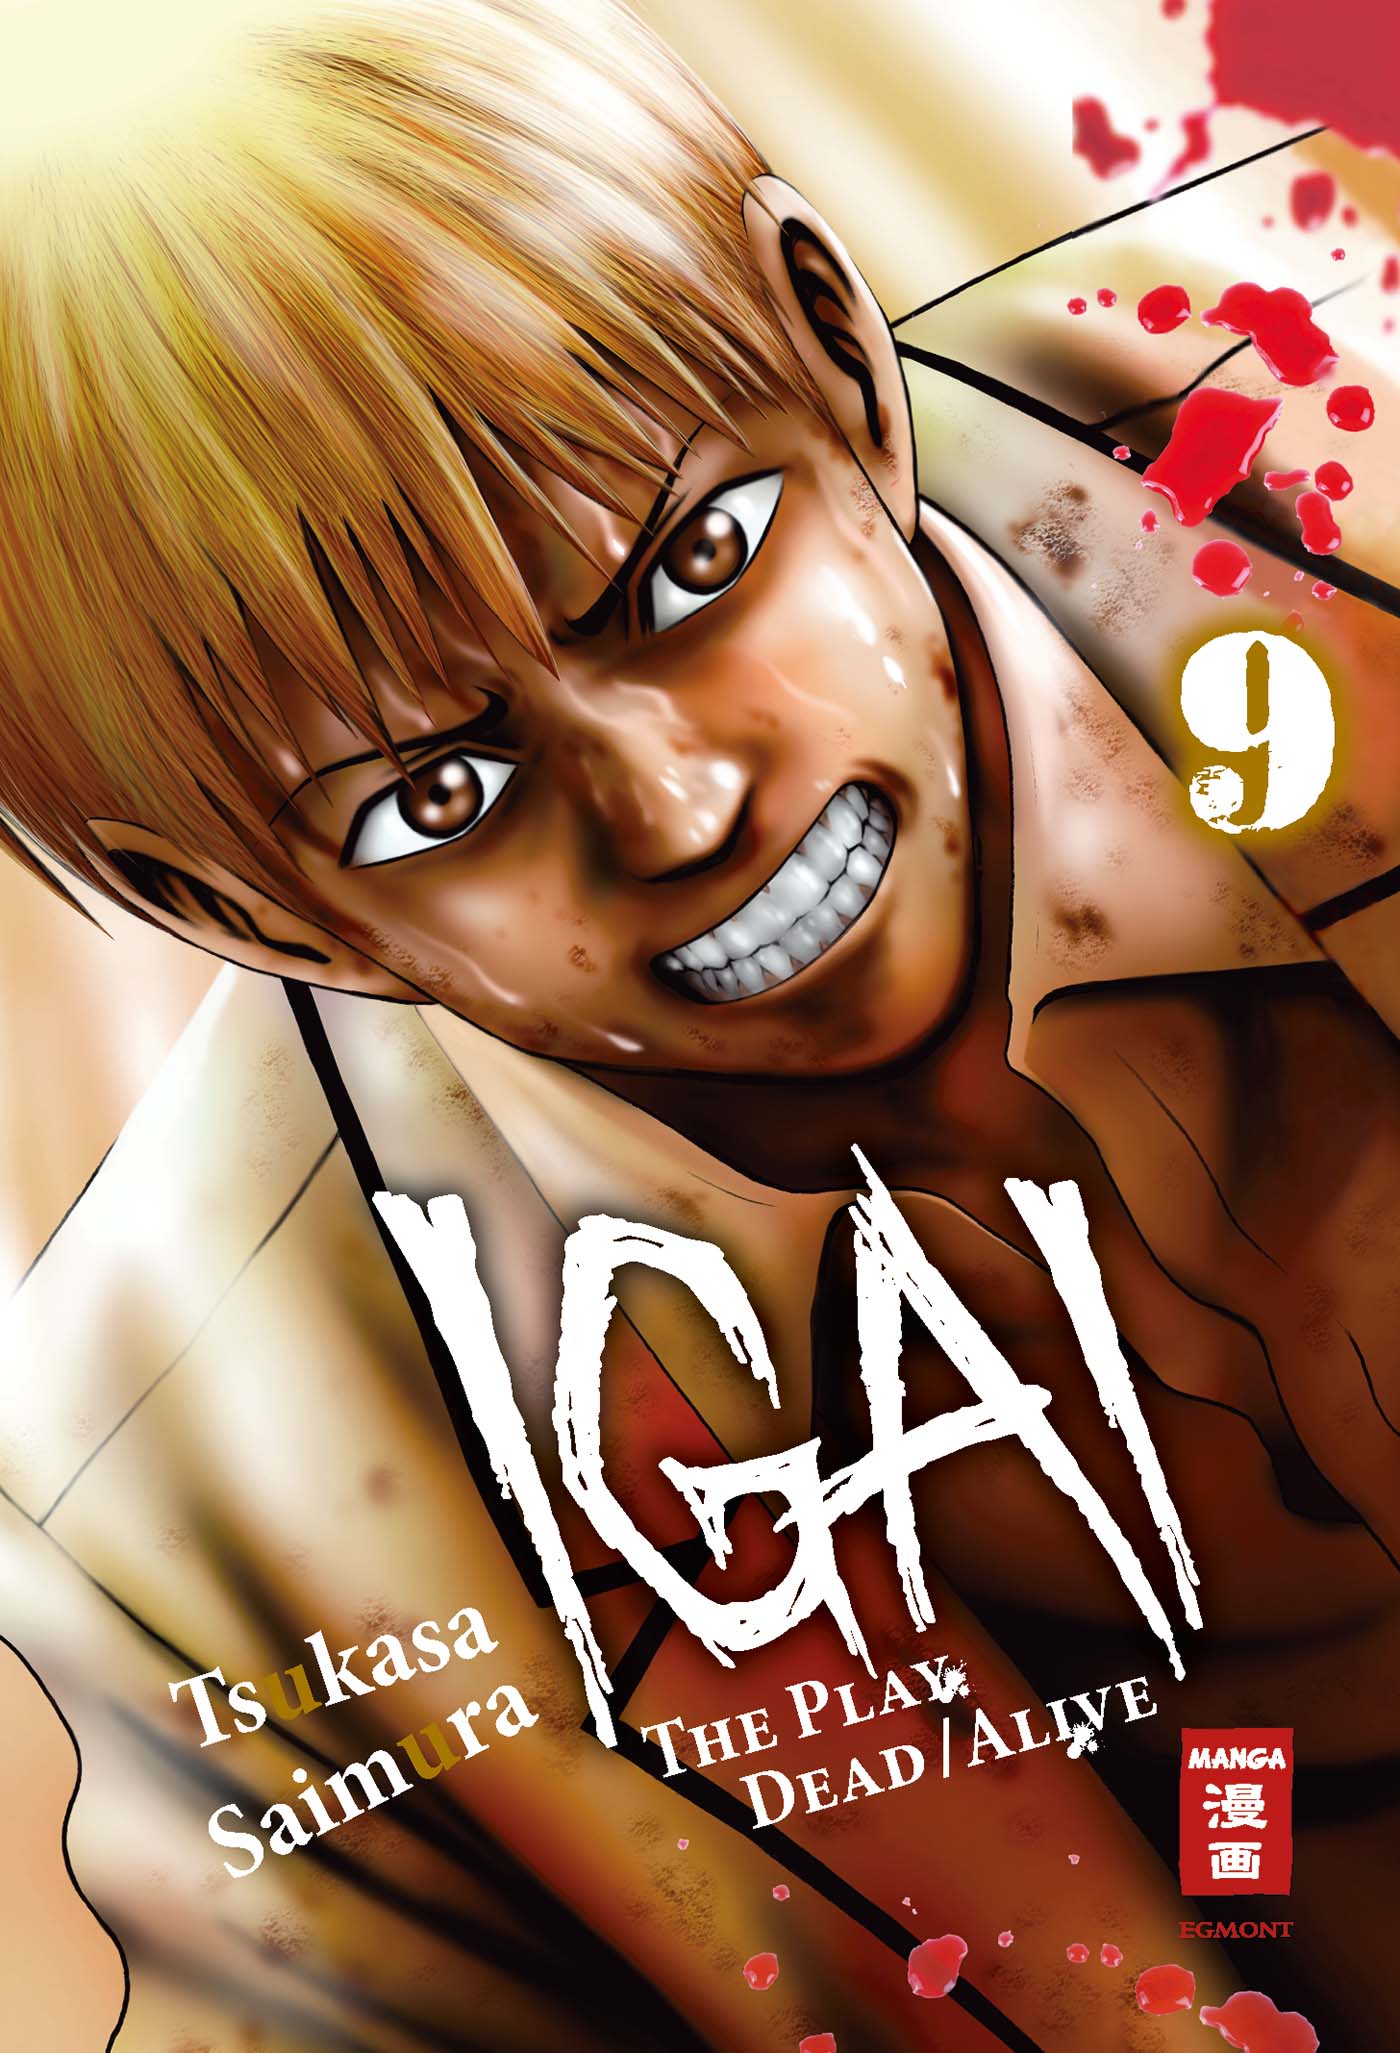 Hour Of The Zombie Manga Igai - The Play Dead/Alive 09